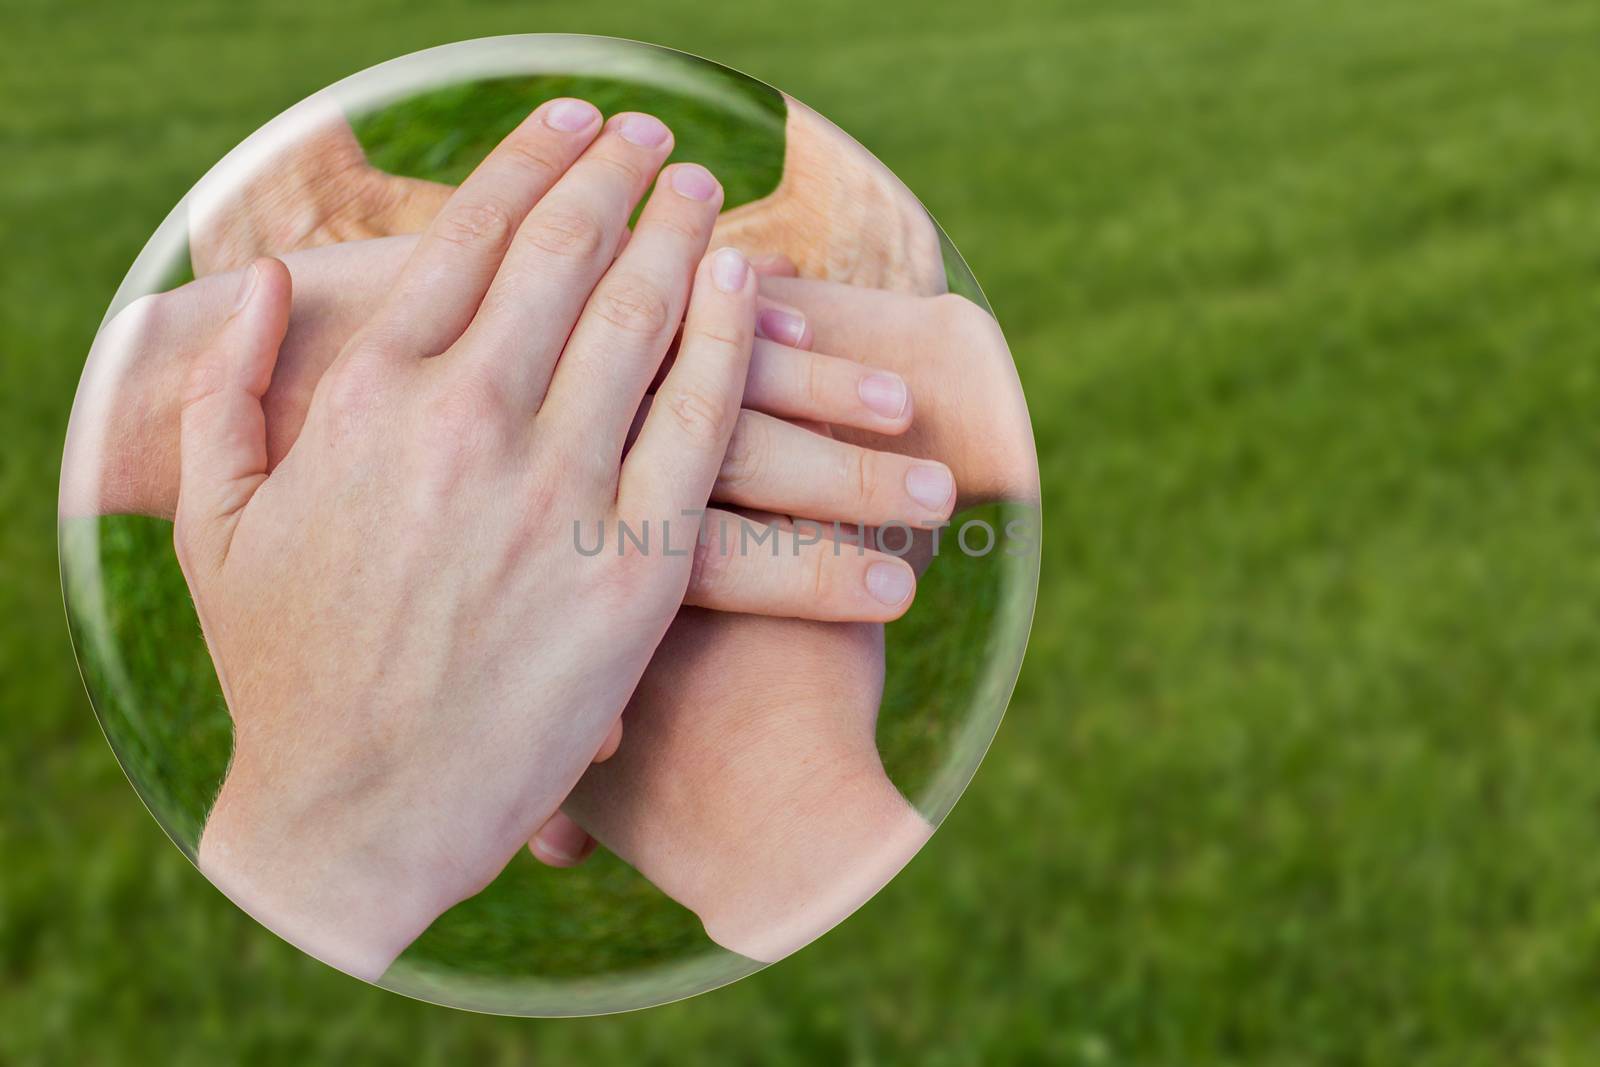 Hands uniting in glass sphere on grass by BenSchonewille